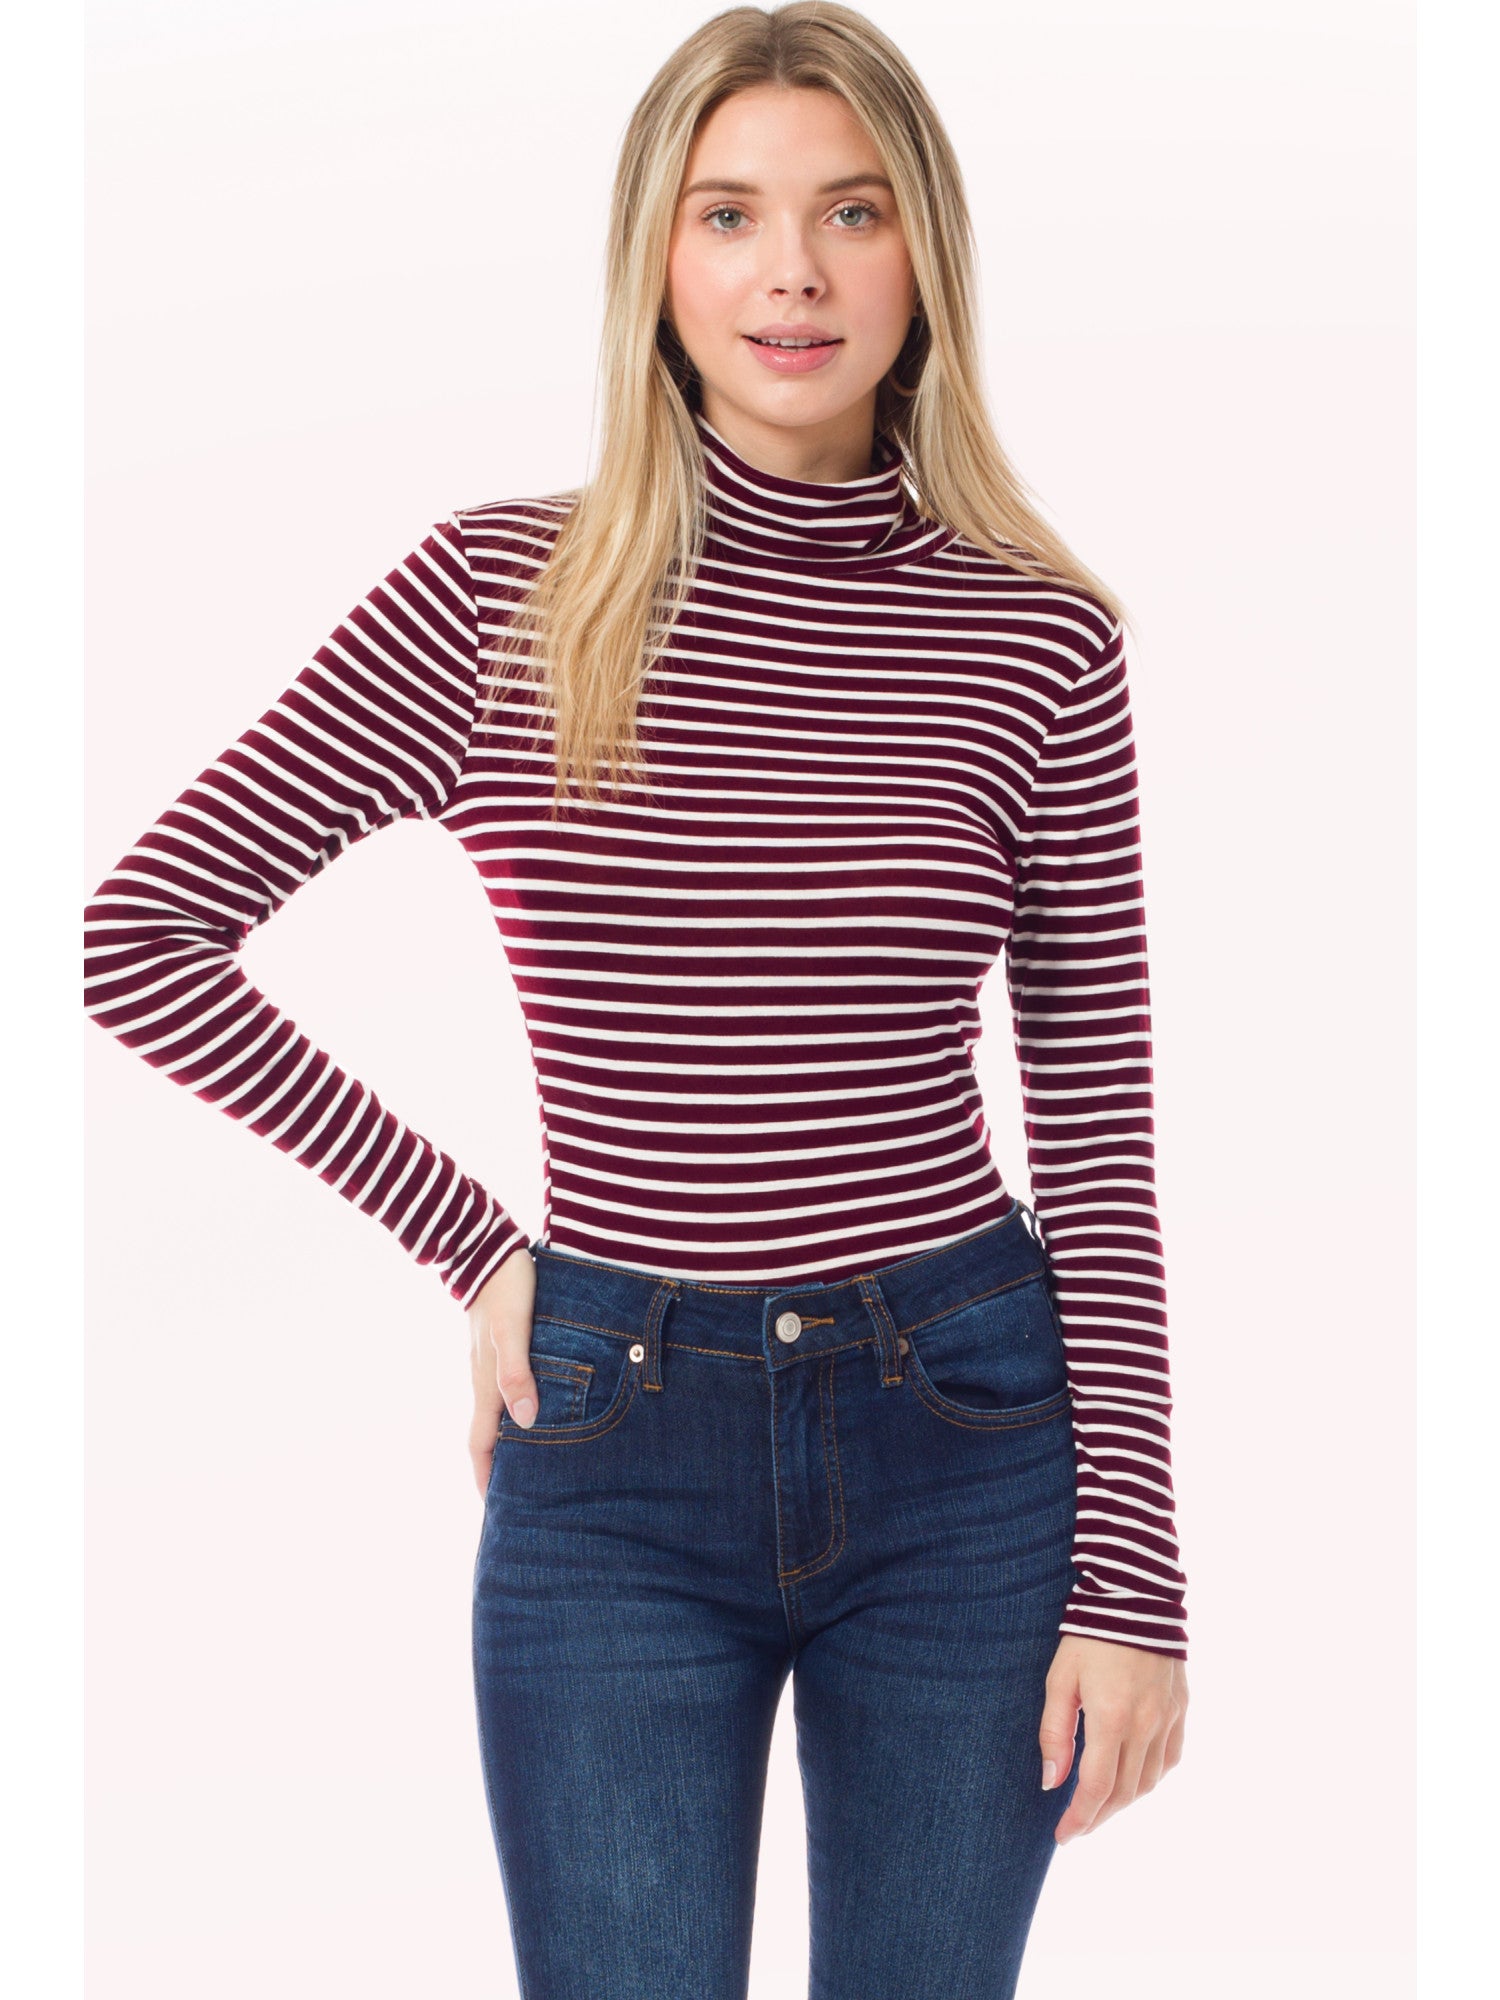 Tight Fit Lightweight Solid/Stripe Long Sleeves Turtle Neck Top